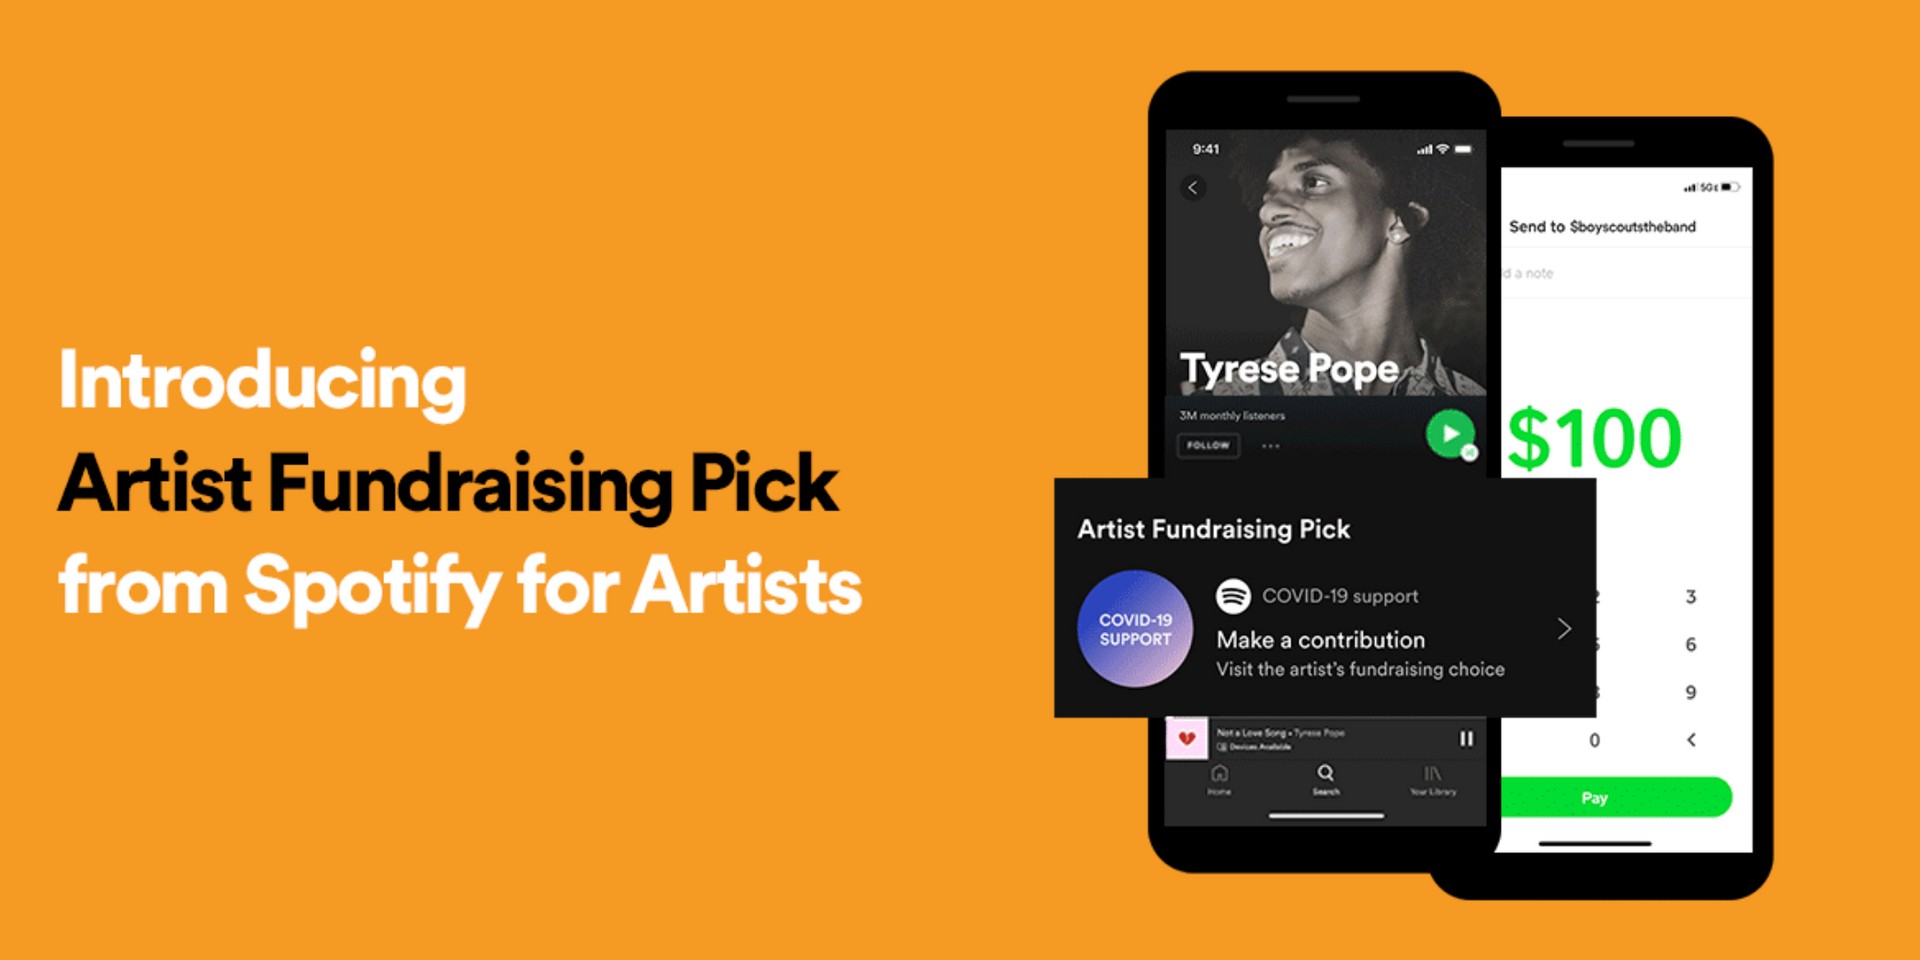 Artists can now fundraise directly from fans with Spotify's new feature, Artist Fundraising Pick